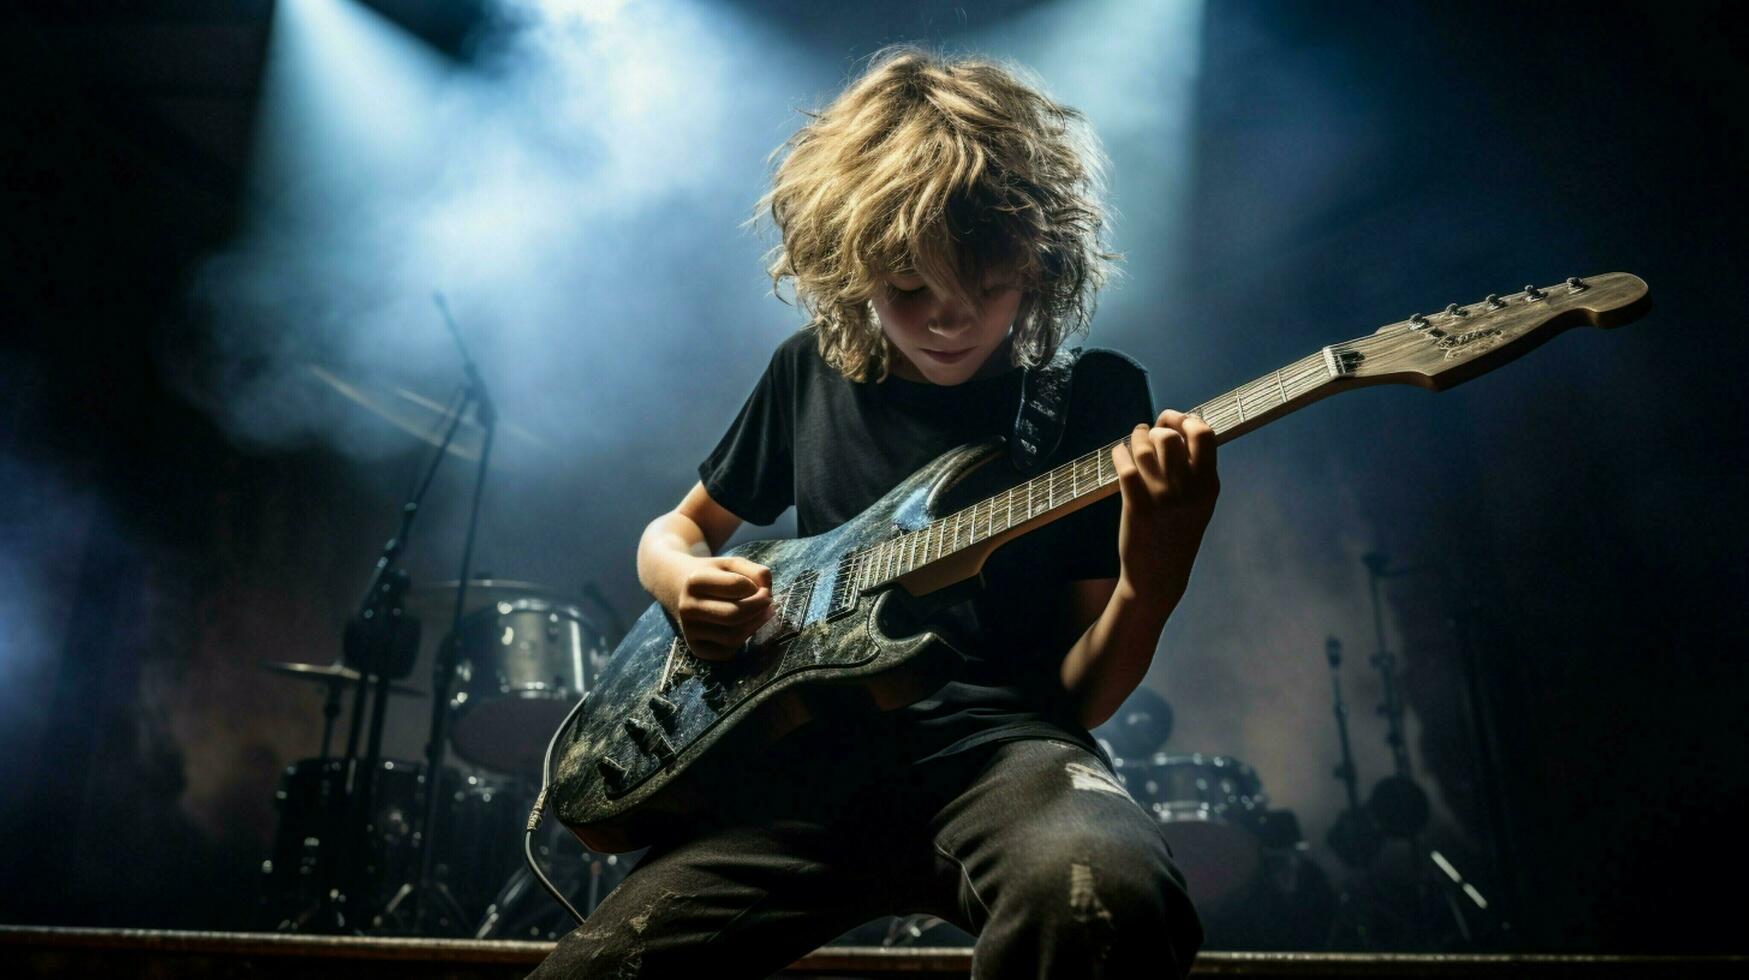 young musician performs rock music on stage photo